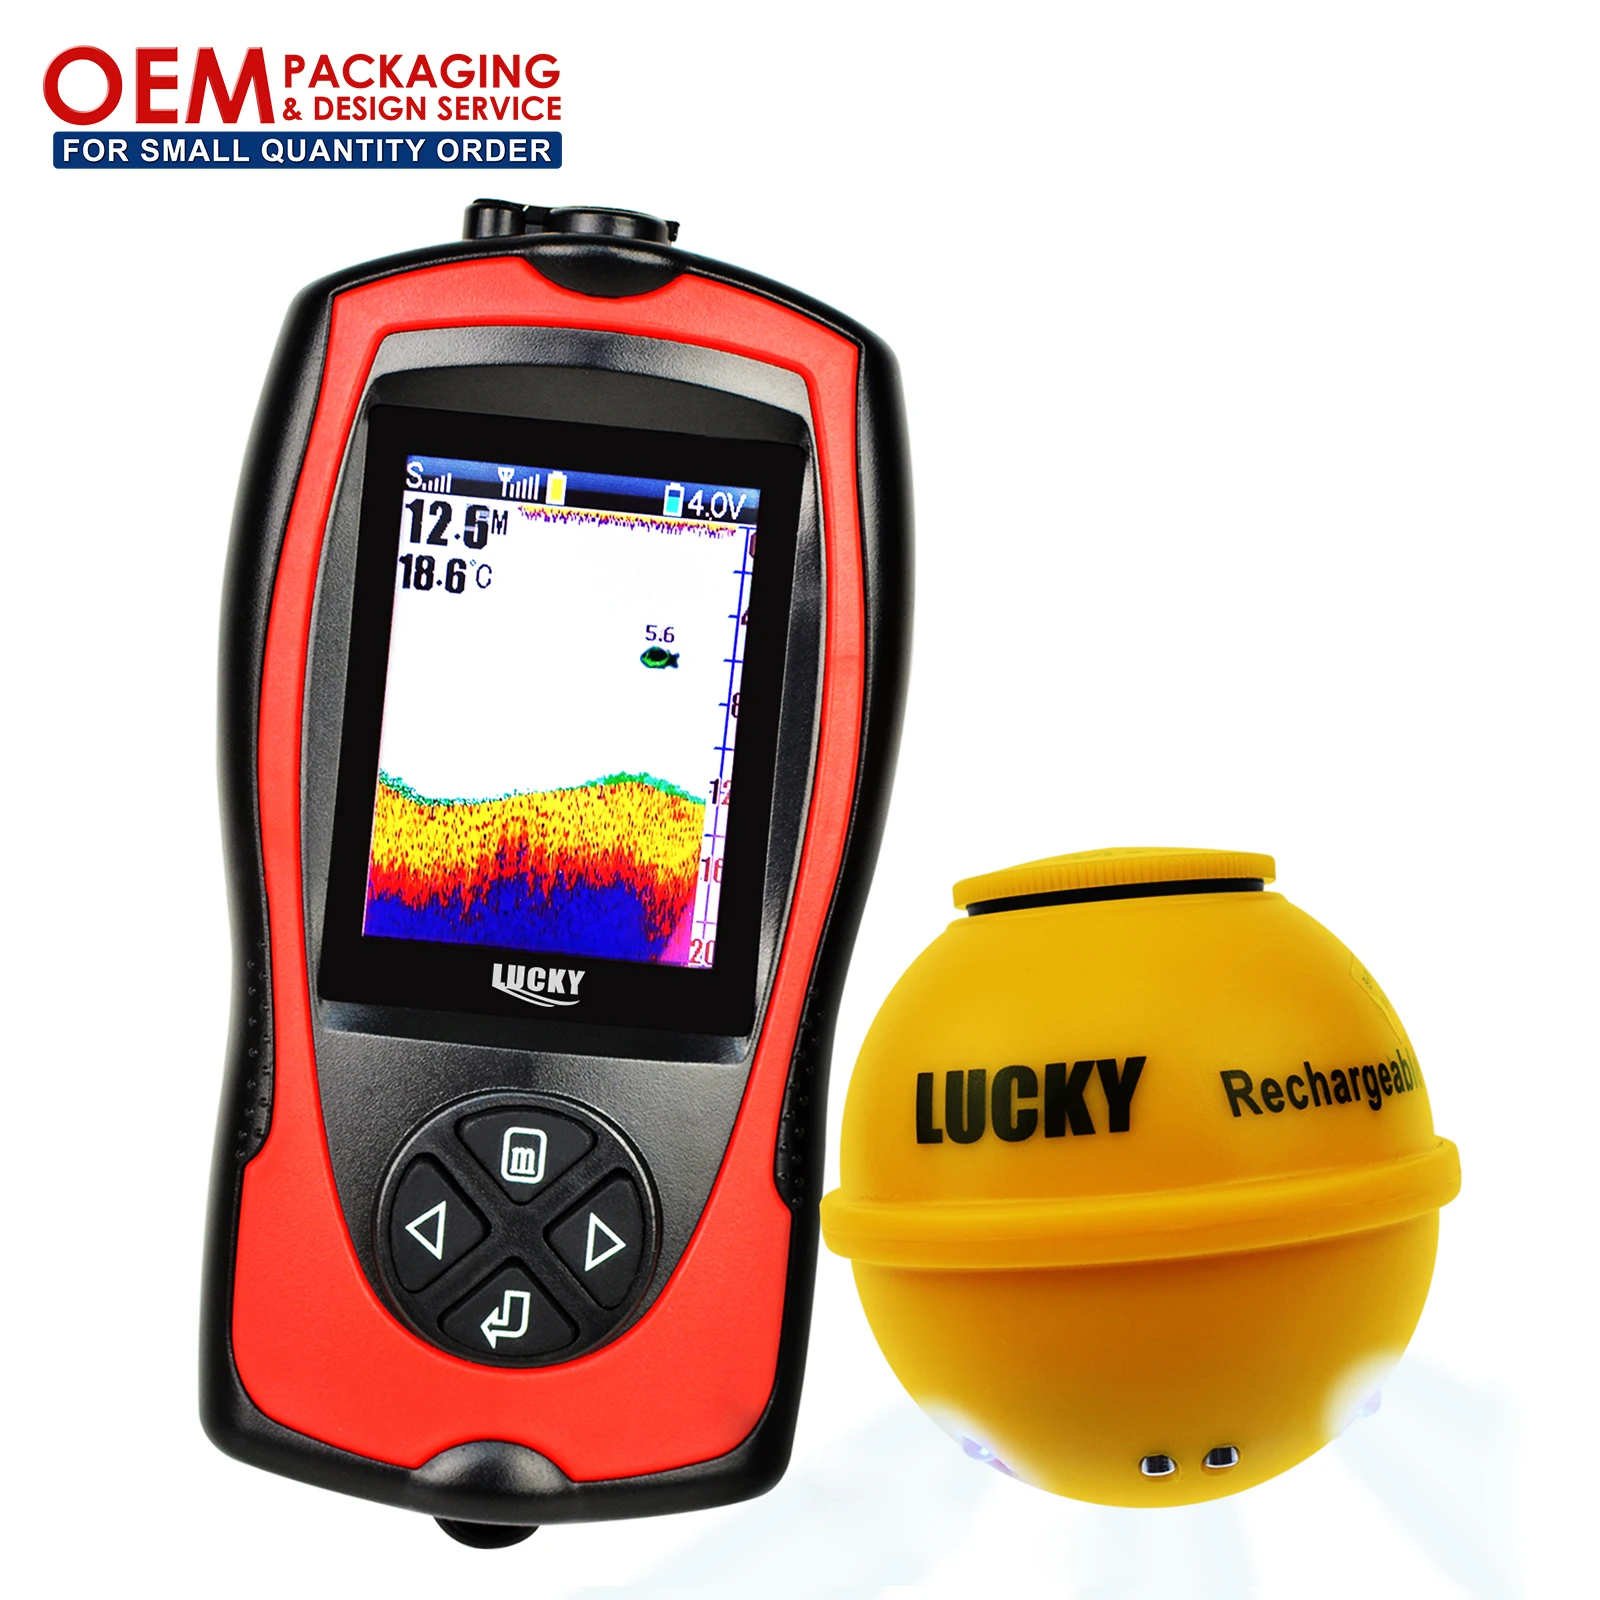 

LUCKY Wireless fish finde 45M Depth 60M Sonar Sensor w/ Fish Attractive Light Lamp & Color LCD (OEM Packaging Available)